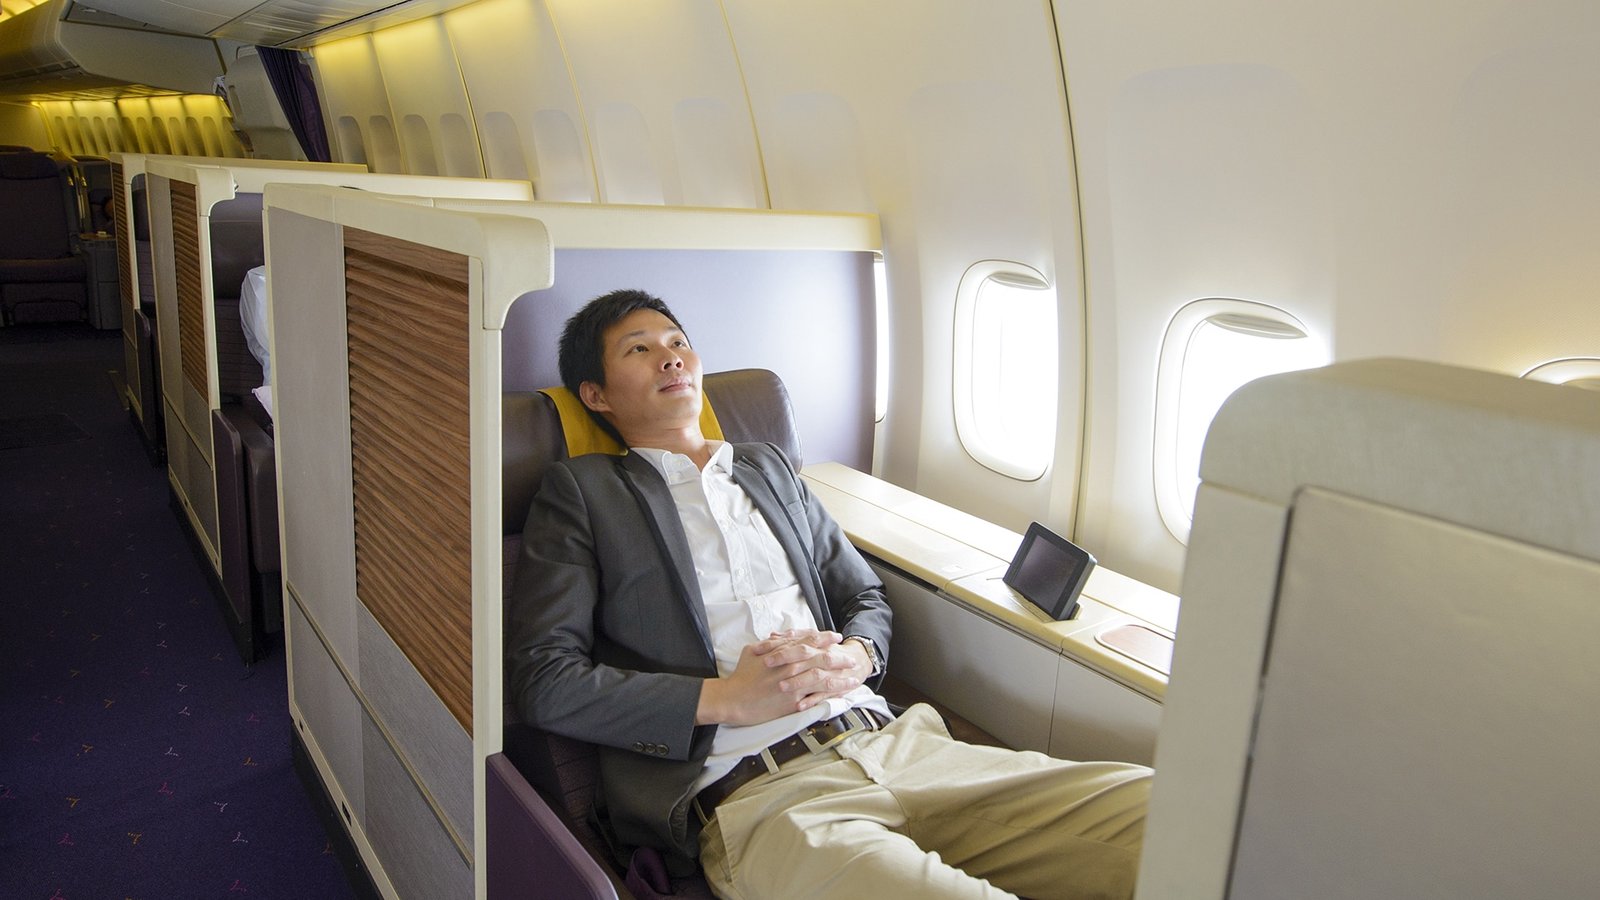 Top 10 Benefits Of Flying First Class